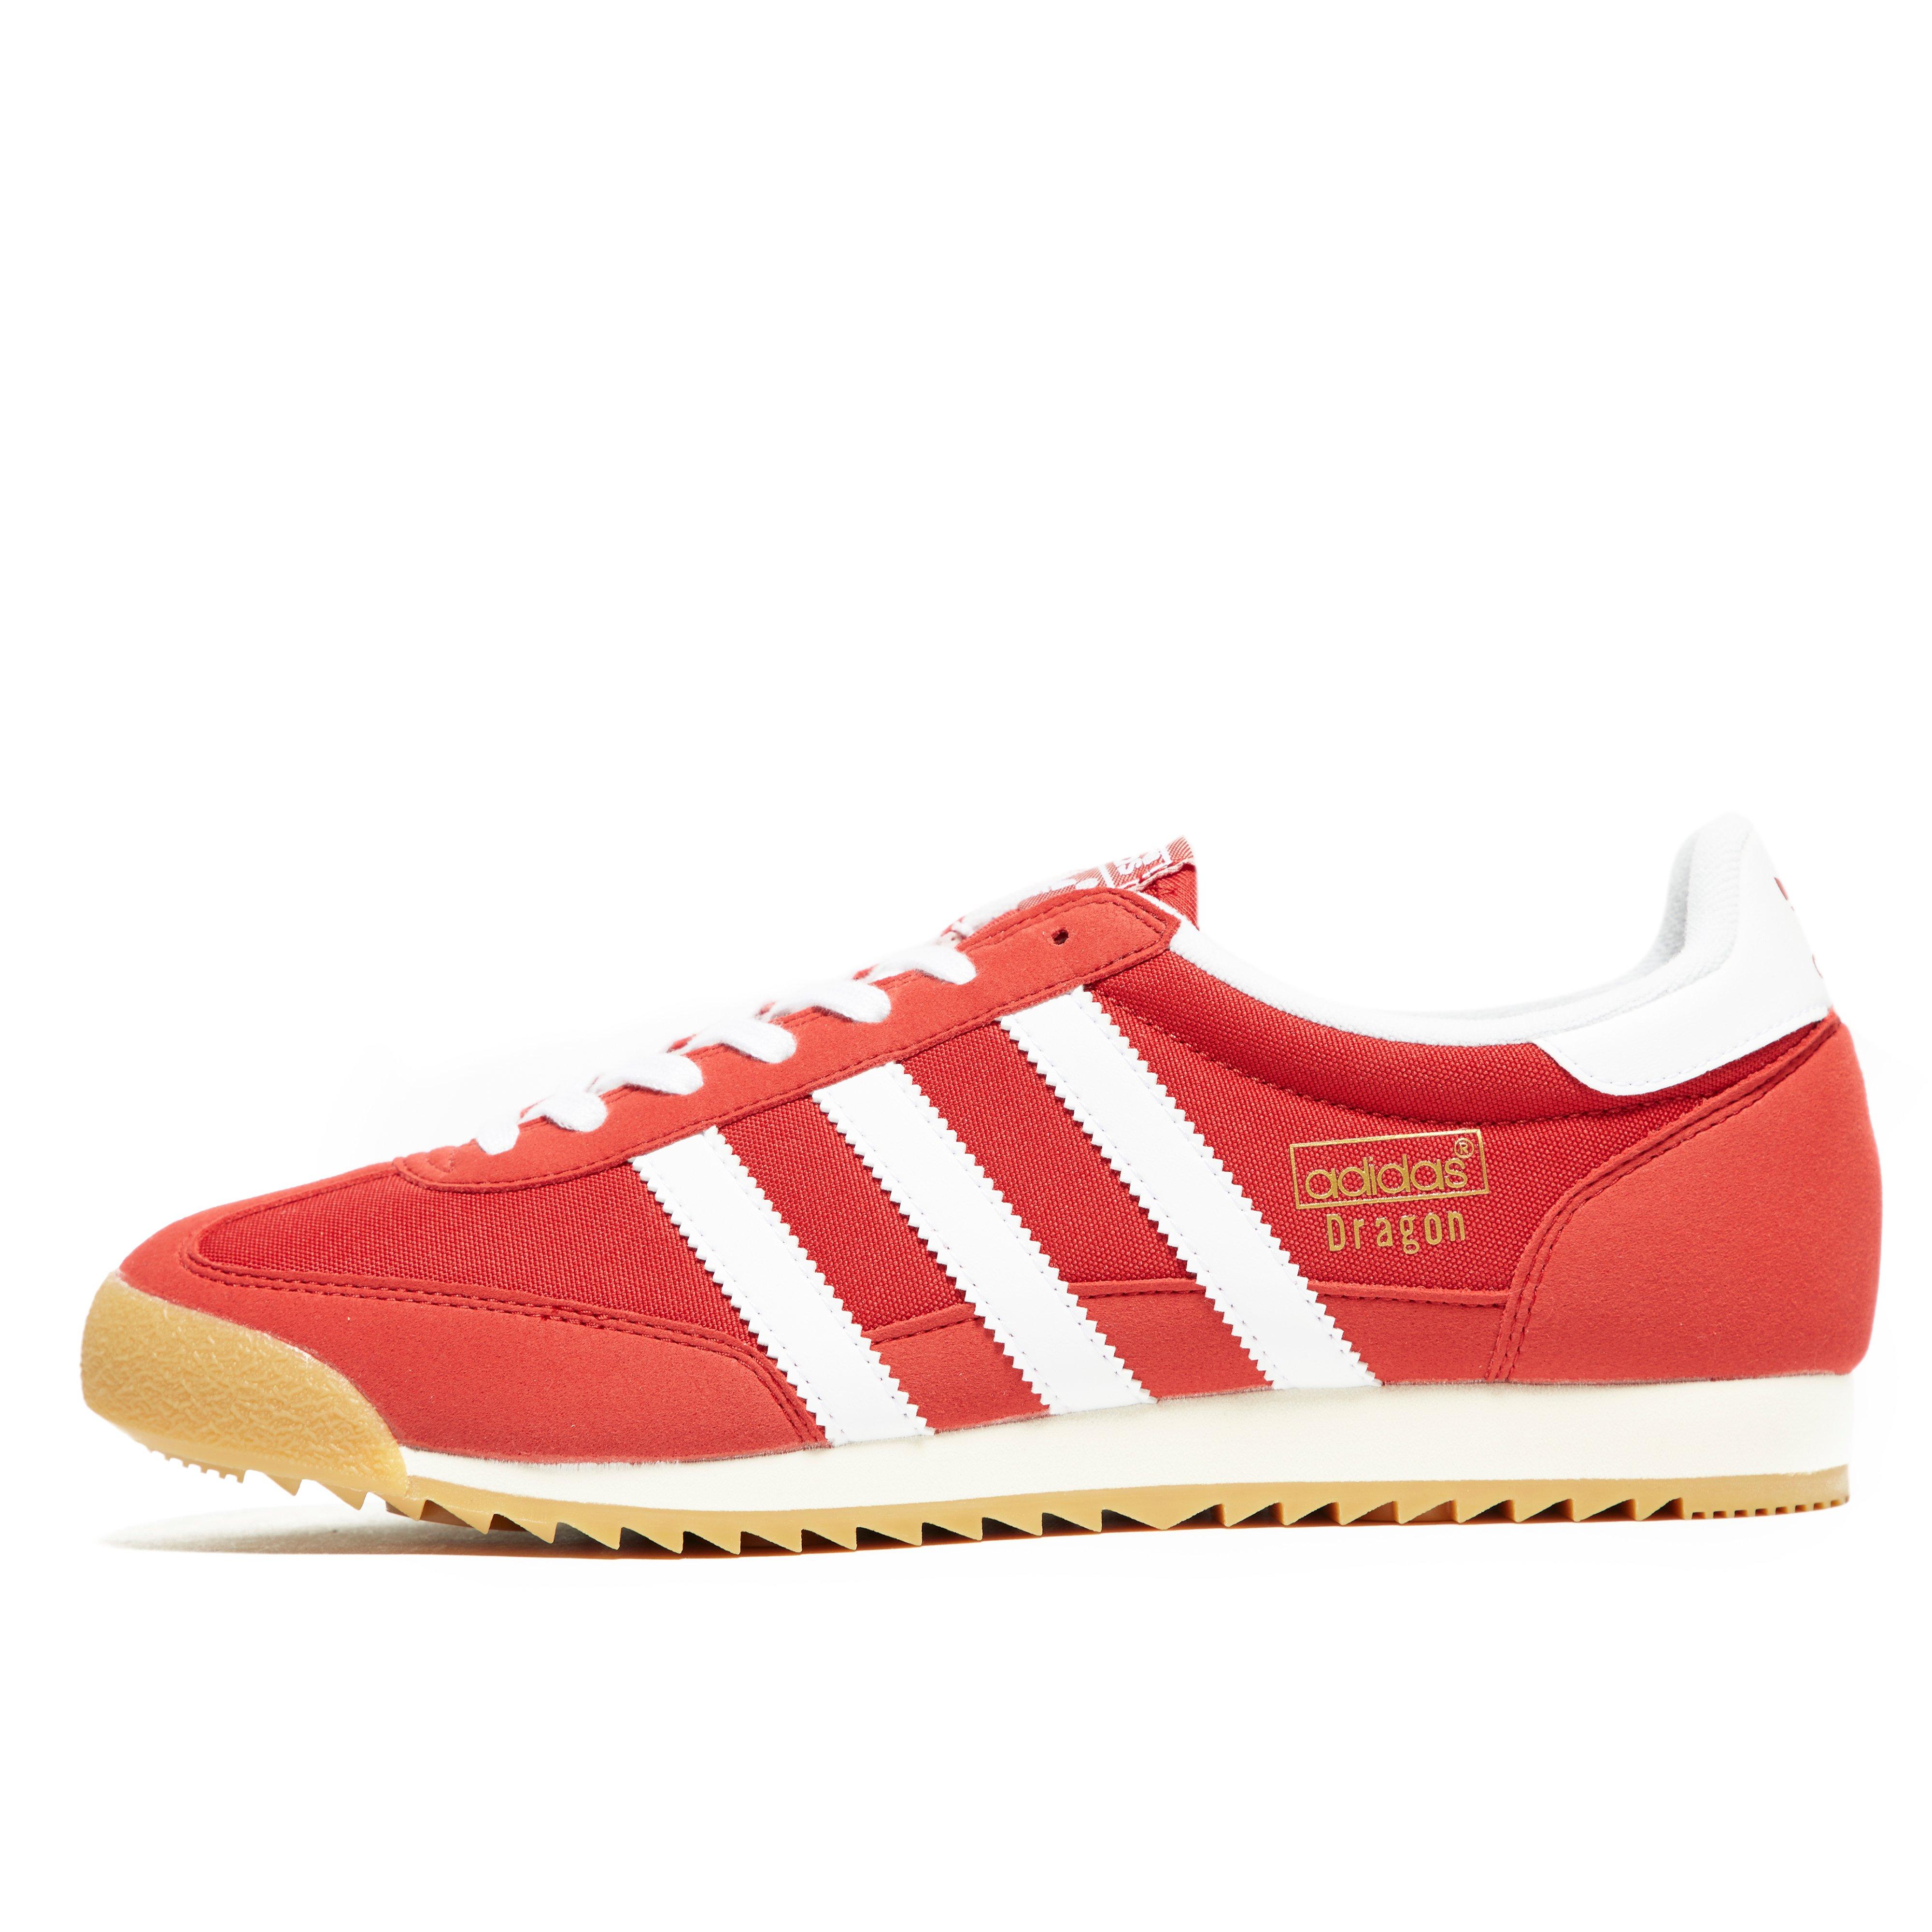 adidas dragon homme rouge